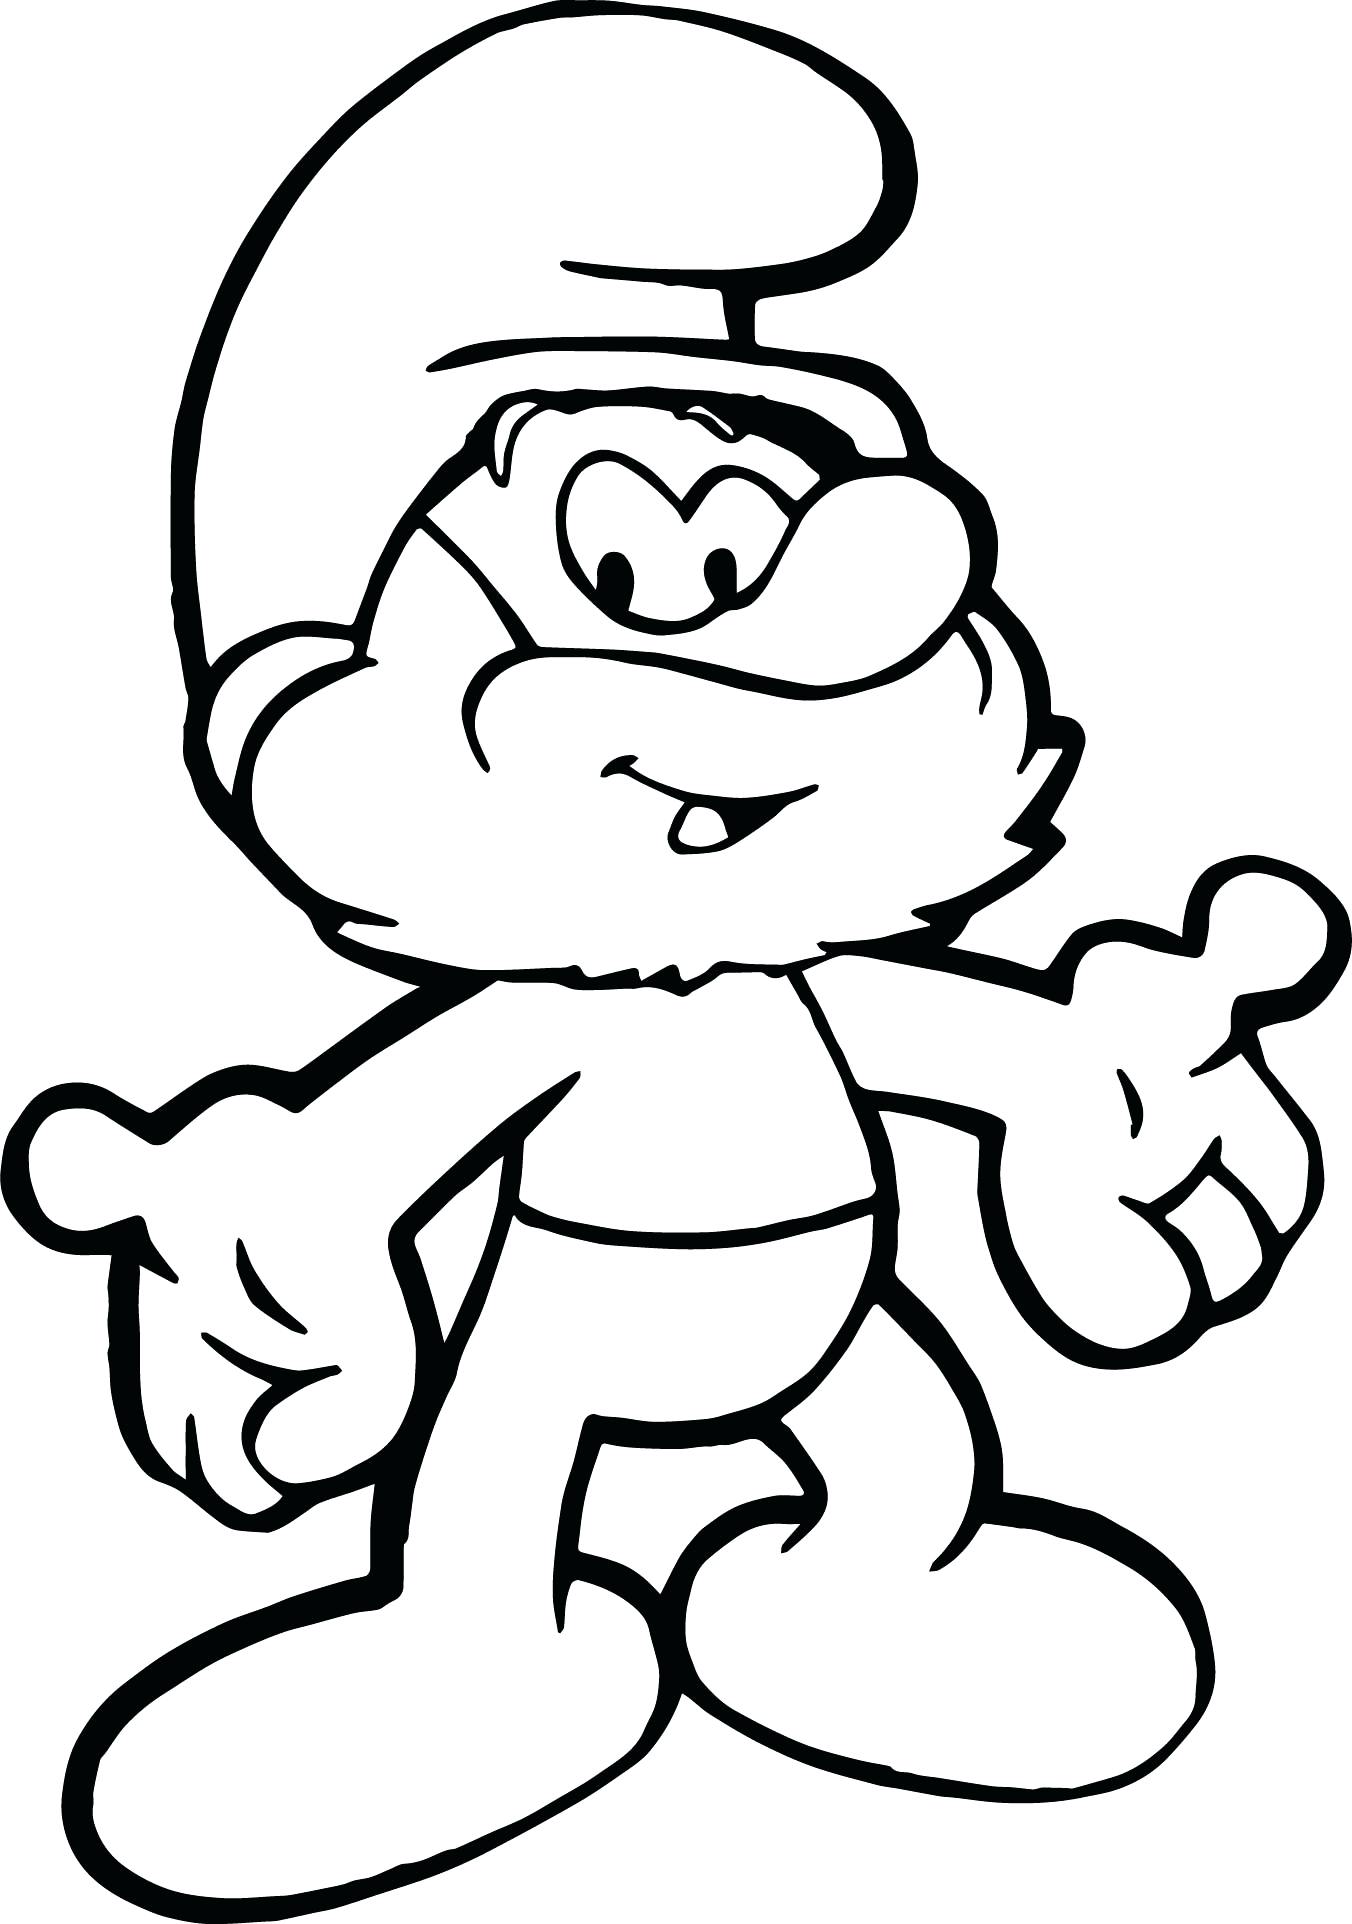 free-printable-pictures-of-smurfs-printable-templates